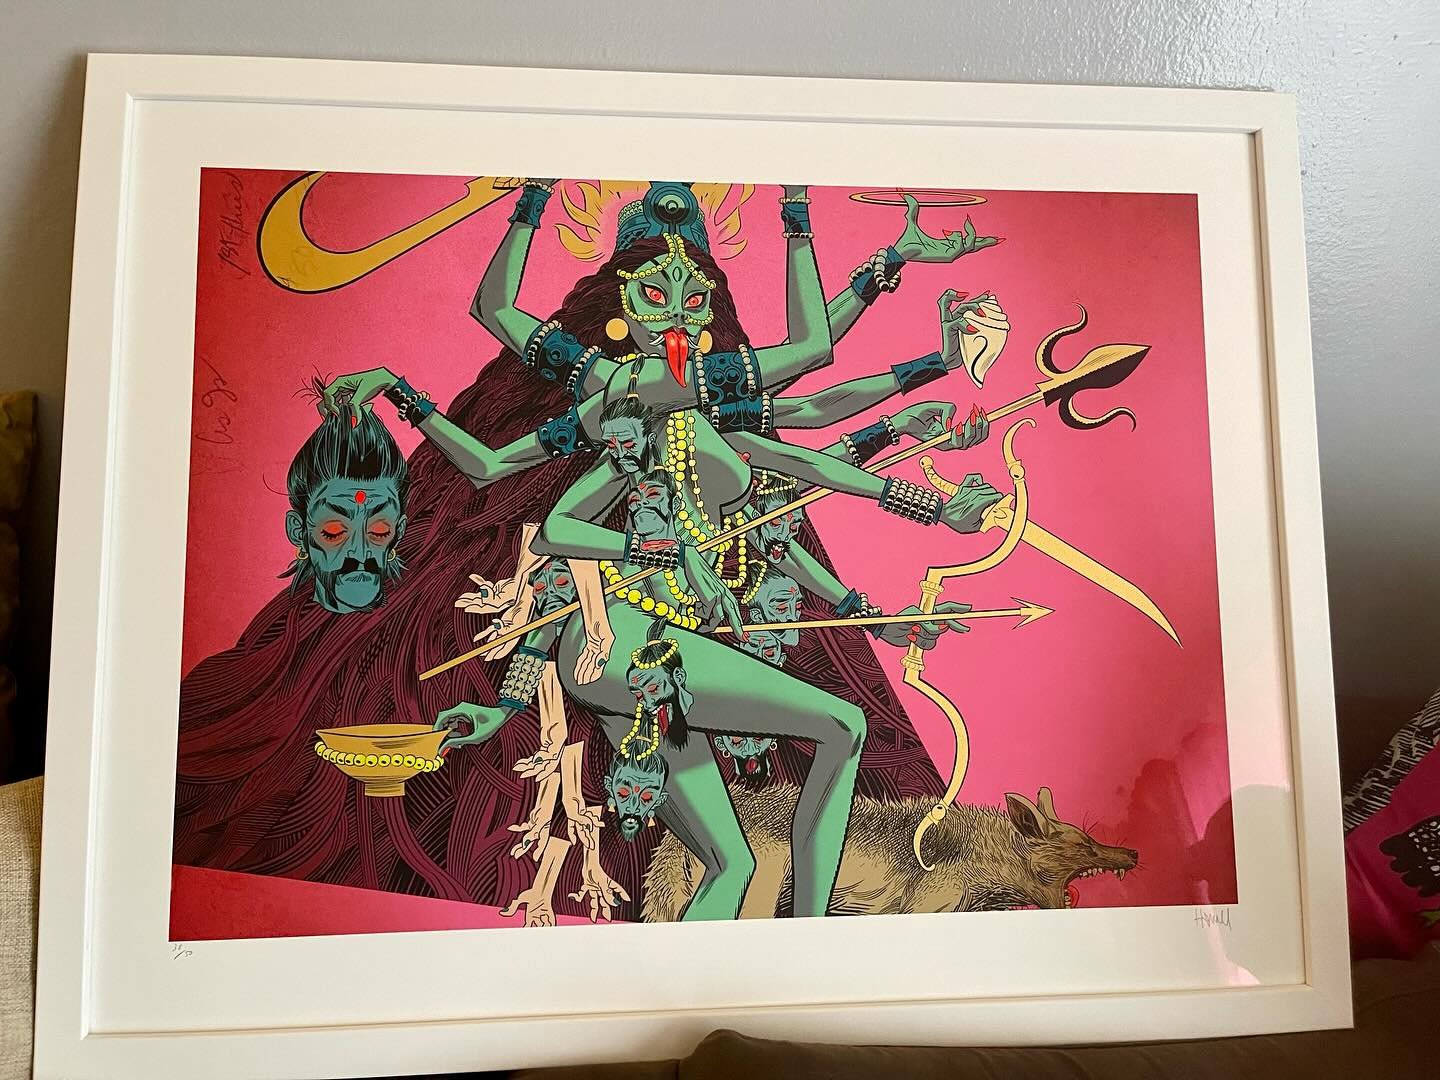 @markgilsonic and I are celebrating 25 years together! And to celebrate, he got me the most amazing gift- a limited edition @hewll print of Kali Ma! This is the most epic gift I&rsquo;ve ever received. Thank you Mark for this incredibly thoughtful gi